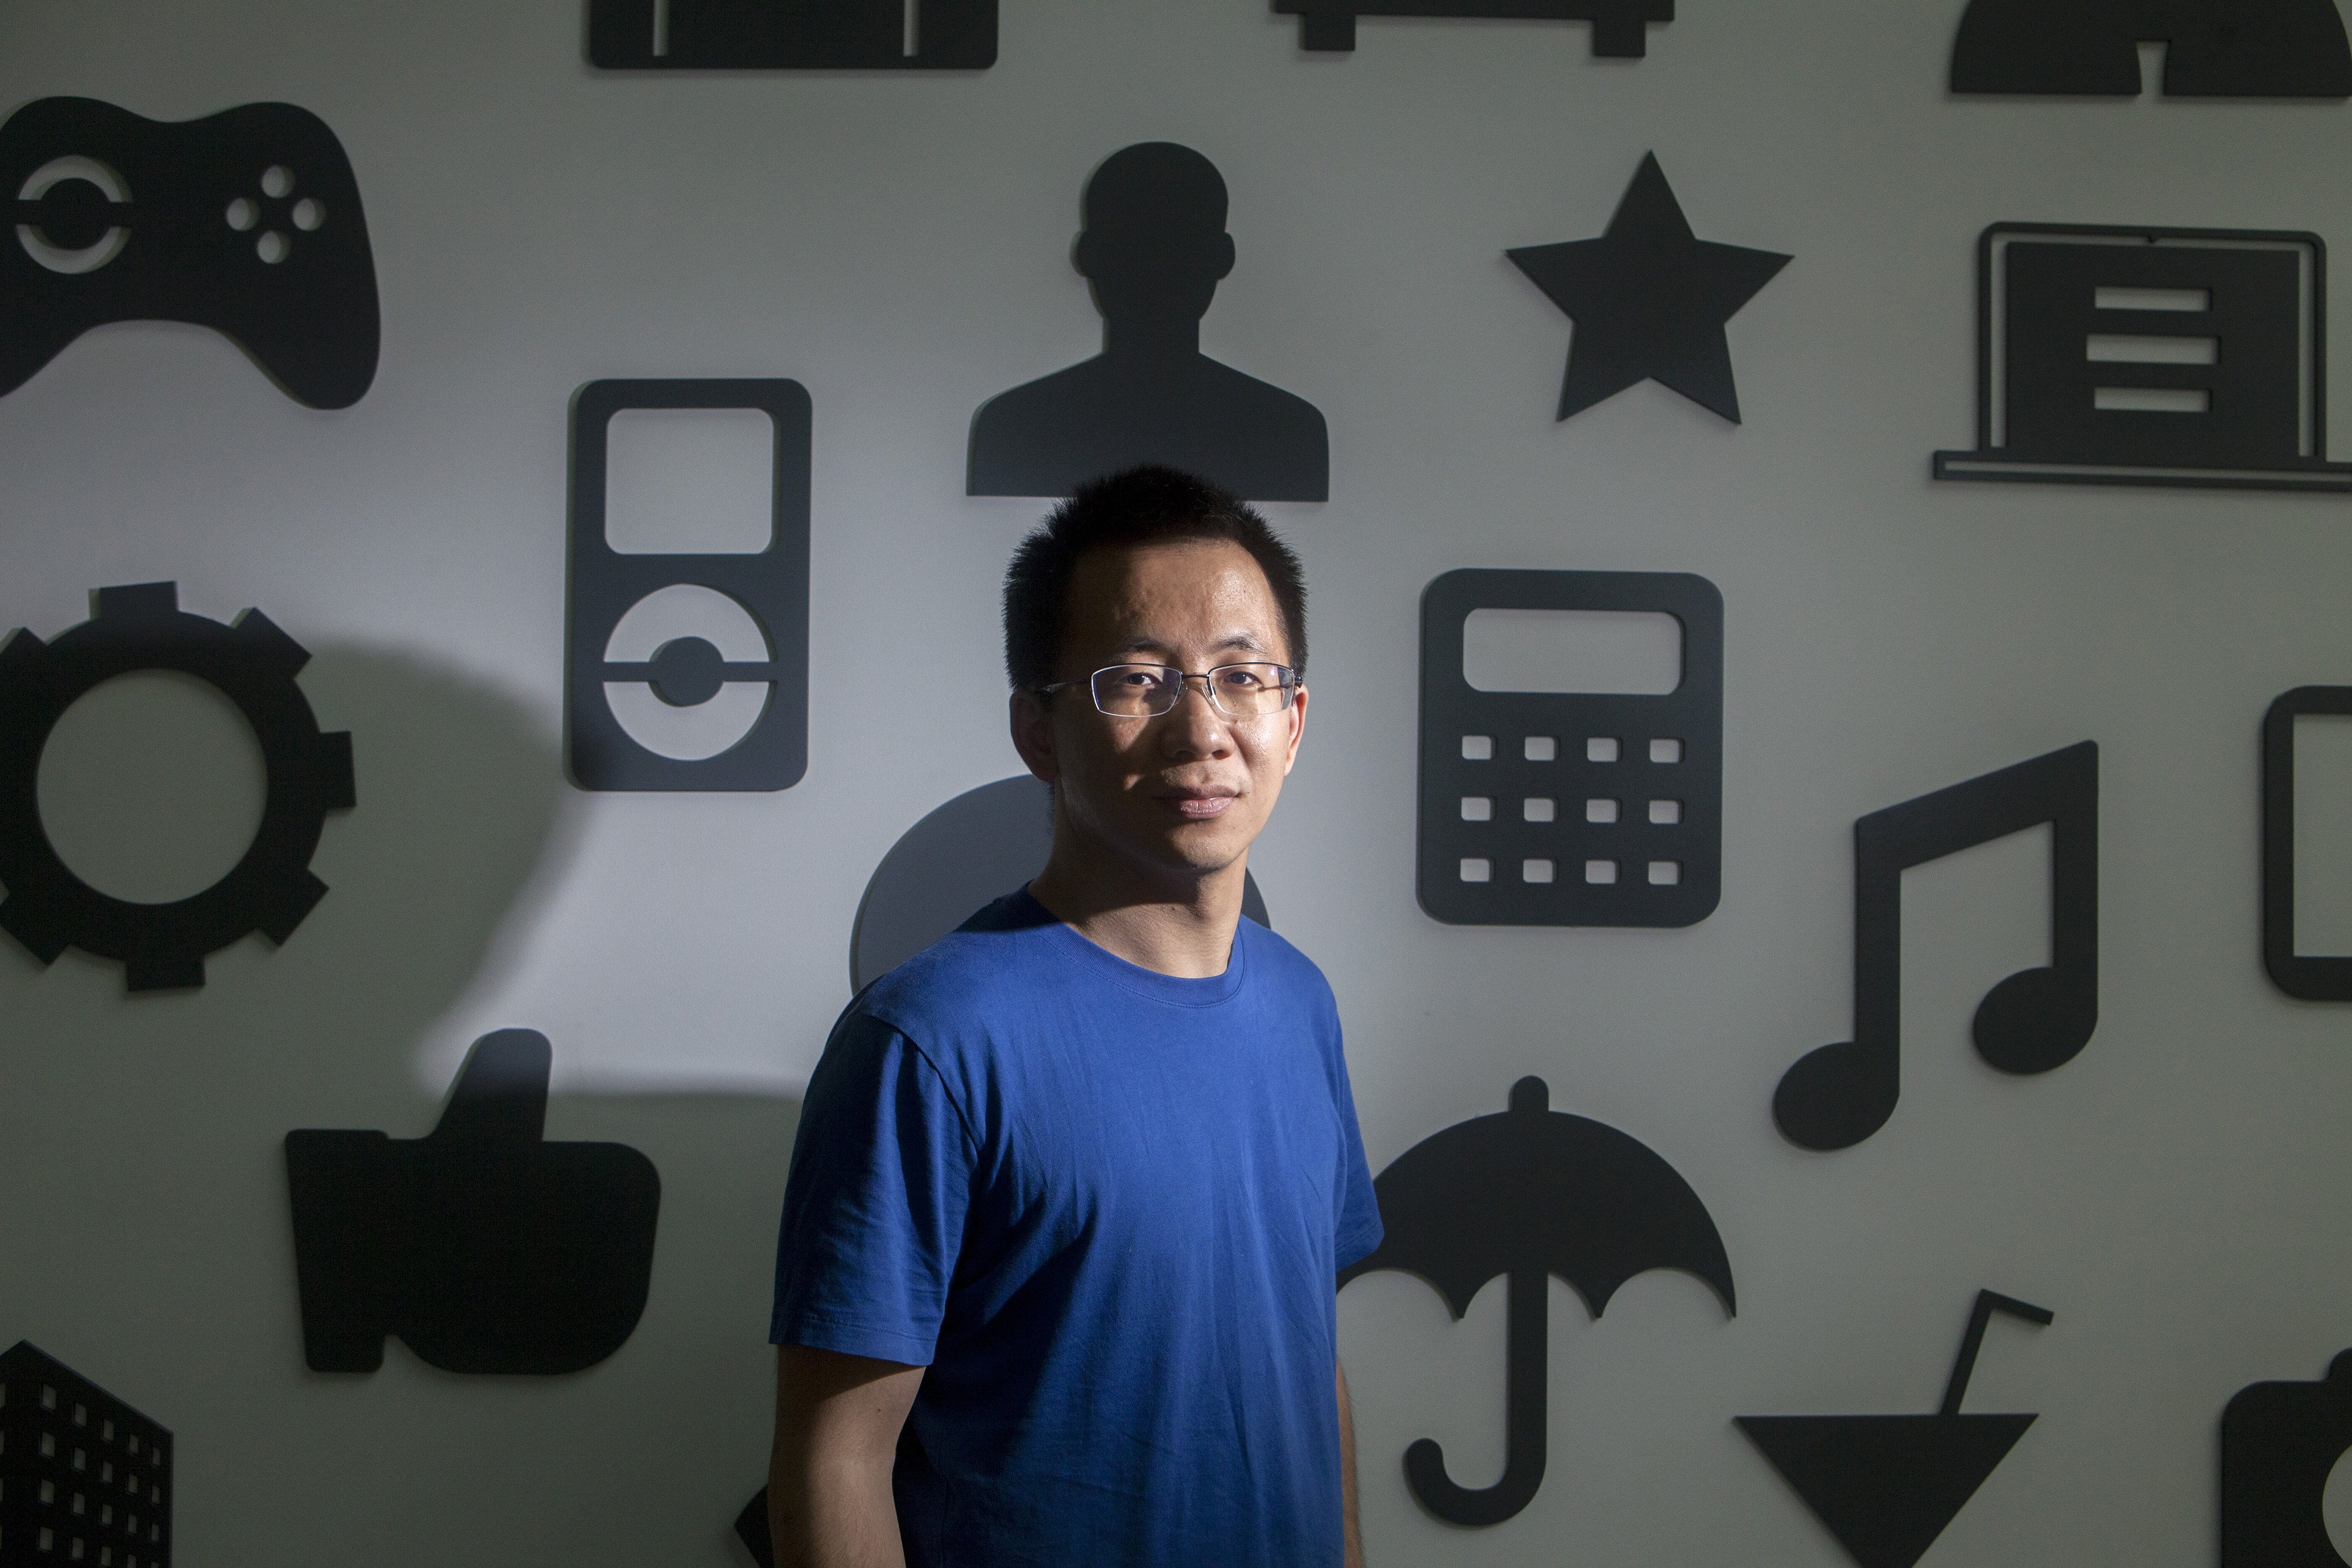 ByteDance founder Zhang Yiming pictured at the company’s Beijing headquarters in 2017. Photo: Bloomberg